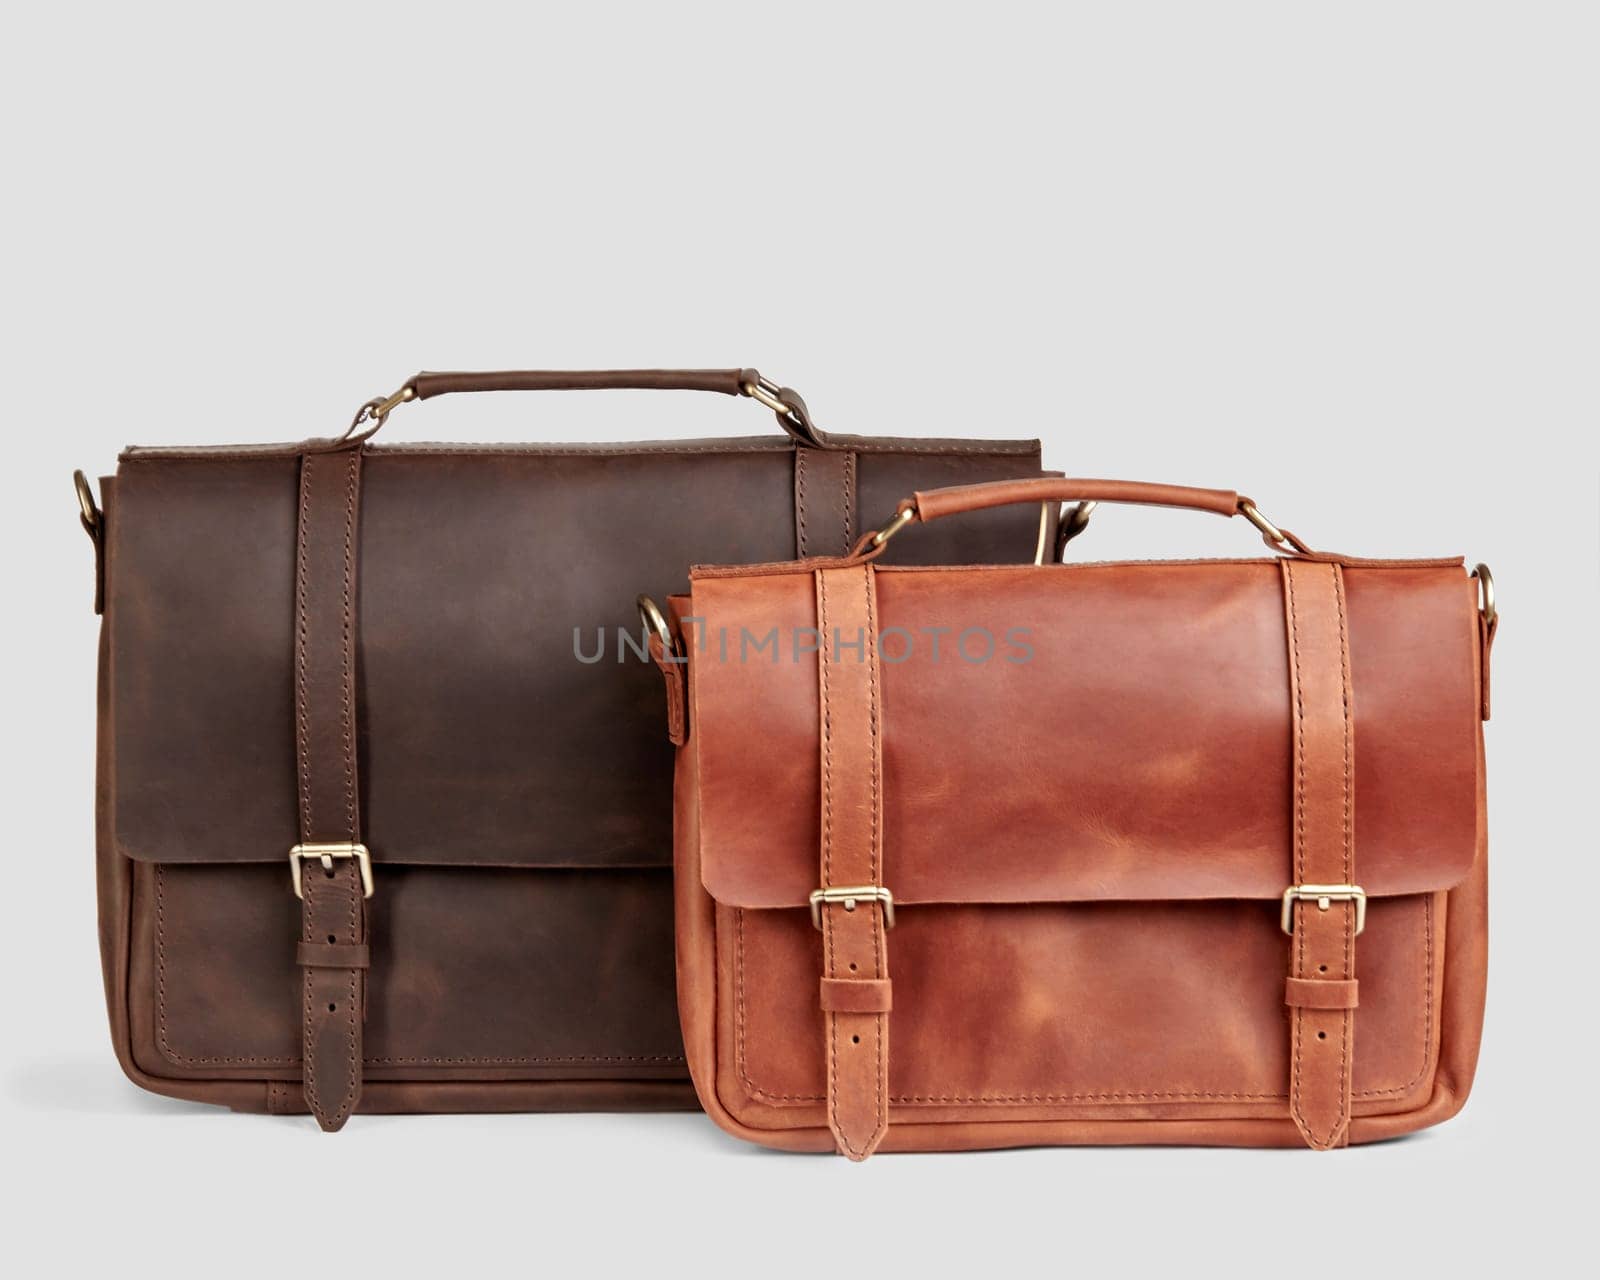 Two stylish leather messenger bags with personalized embossing by nazarovsergey